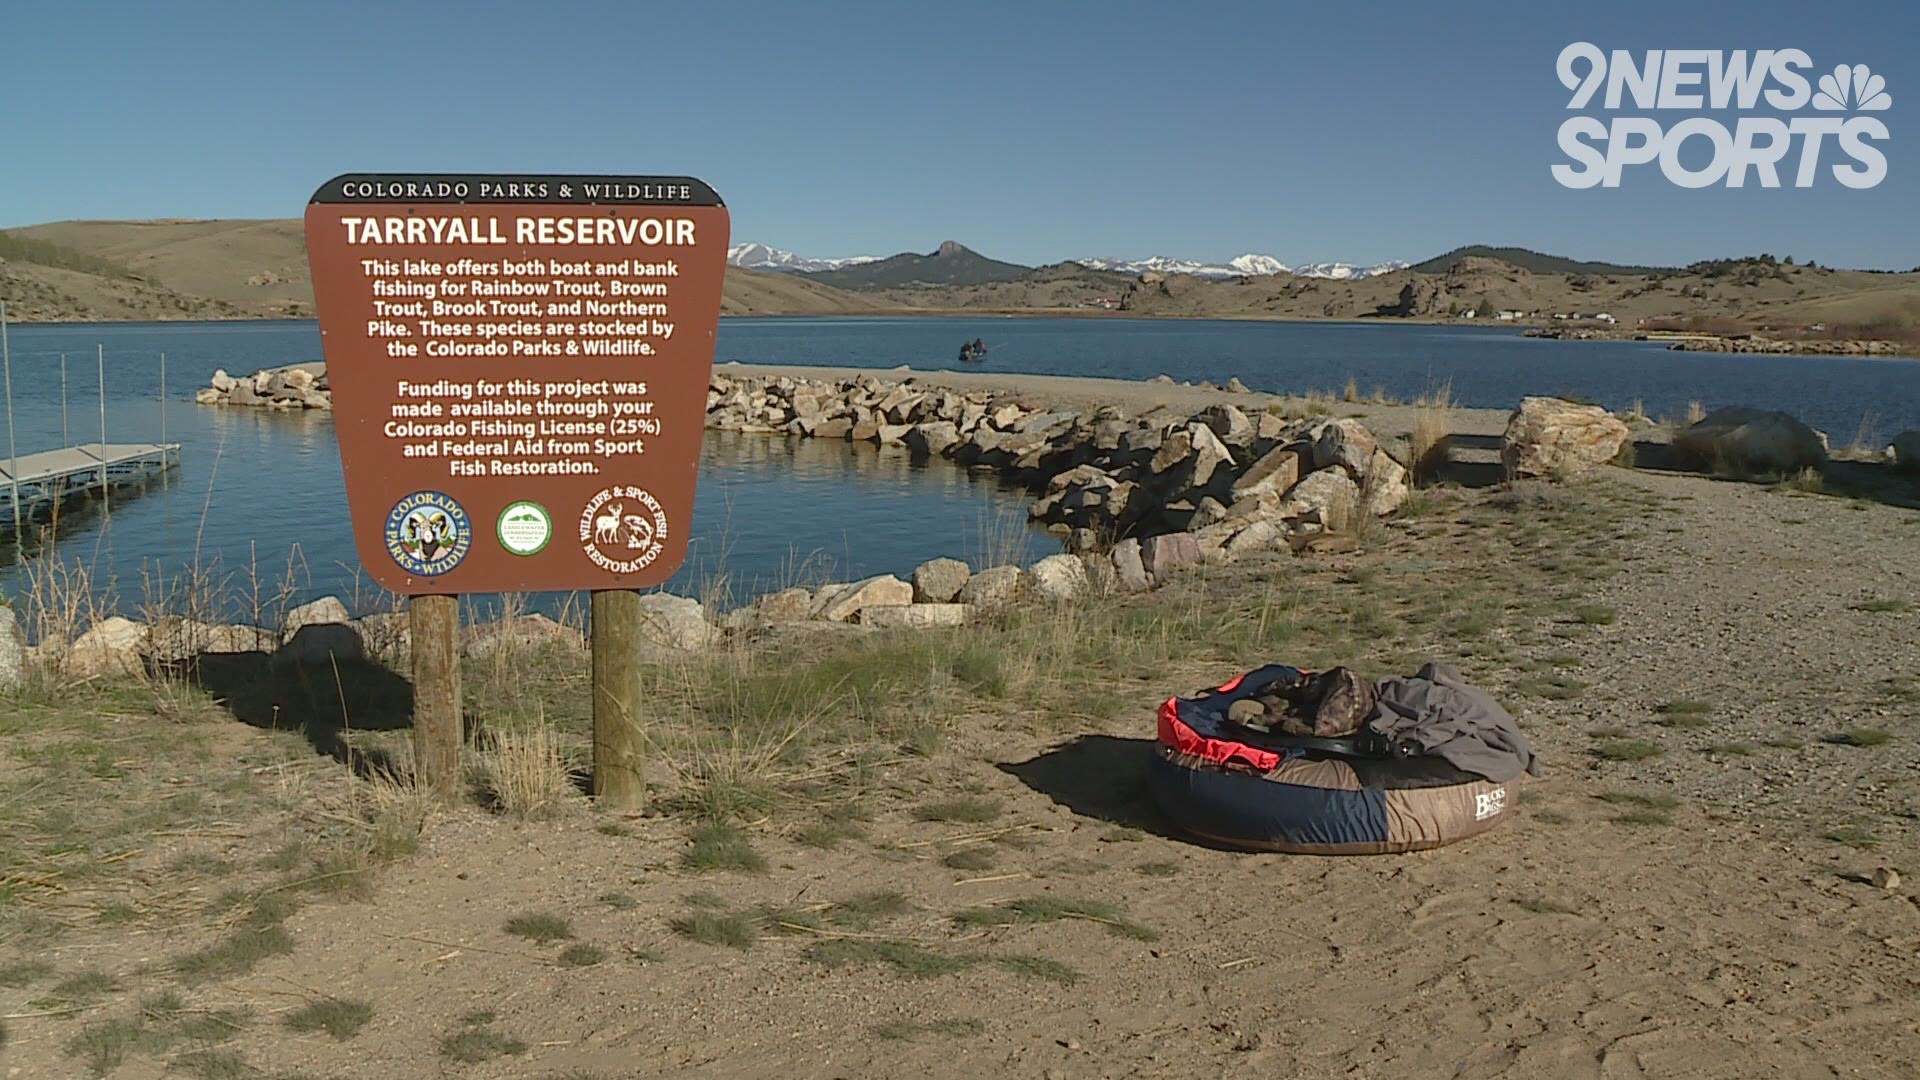 There are a lot of ways to catch a fish, but one of the favorites at Tarryall Reservoir involves fins.